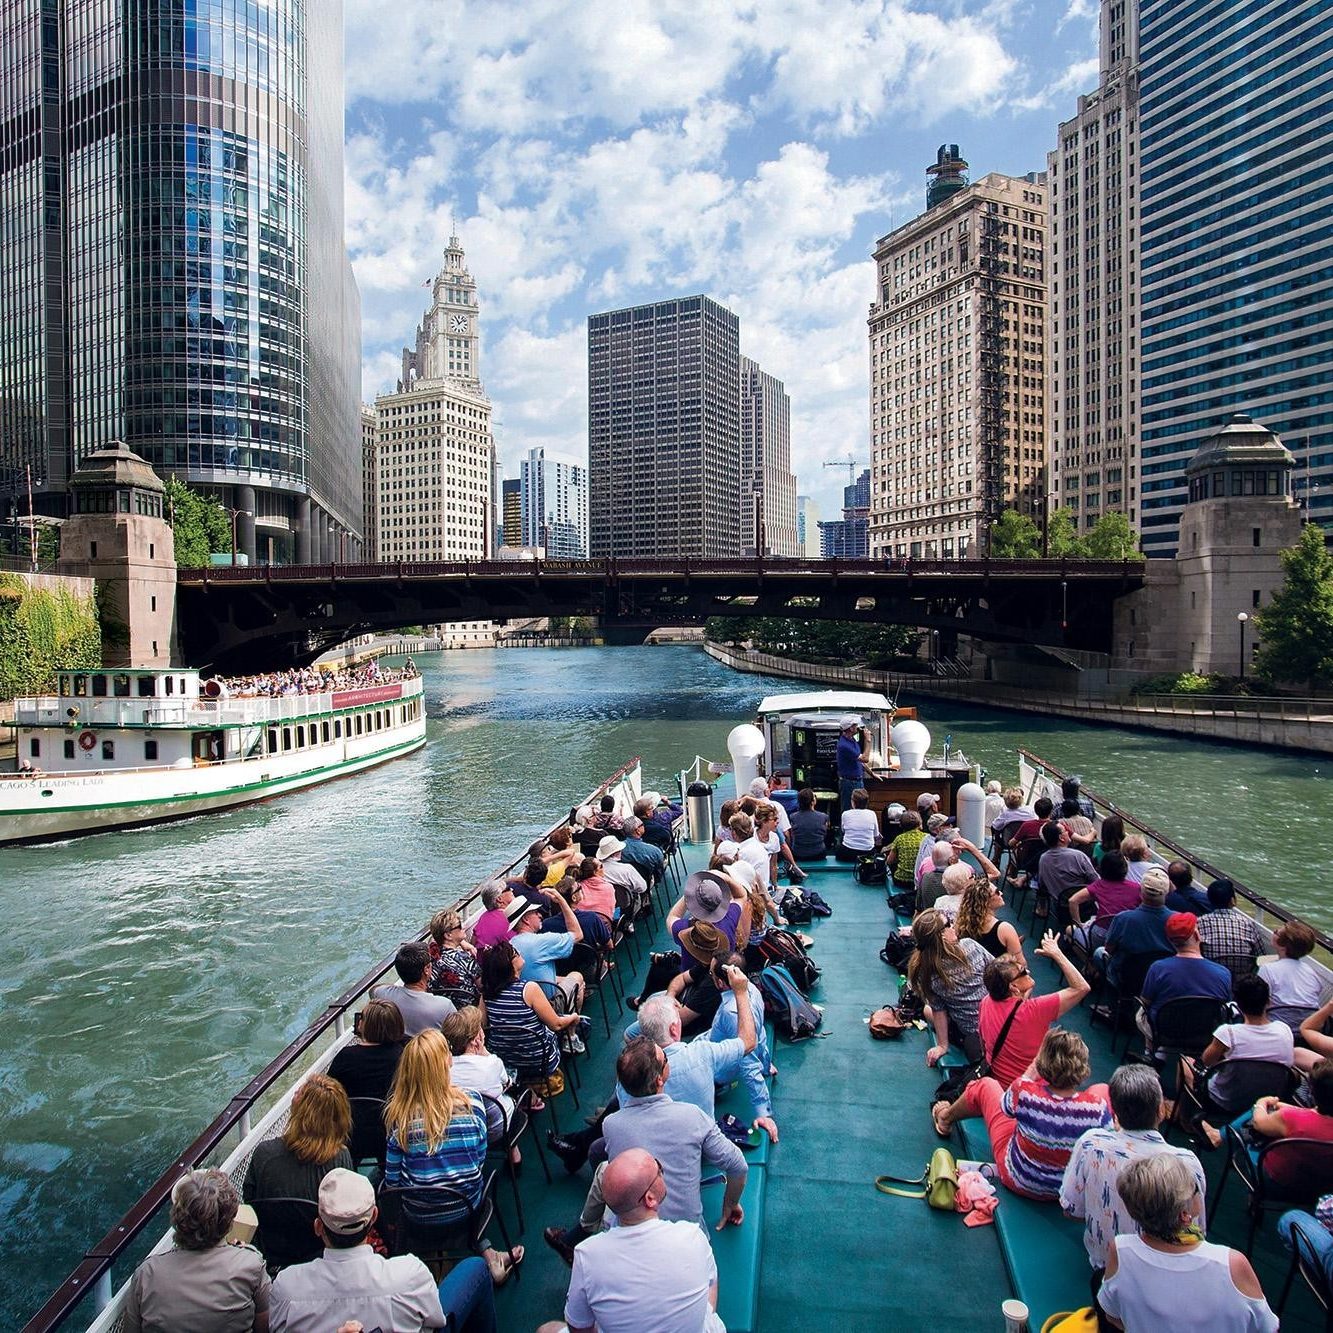 Boat tours at Chicago canal, popular destination for private aircraft charter